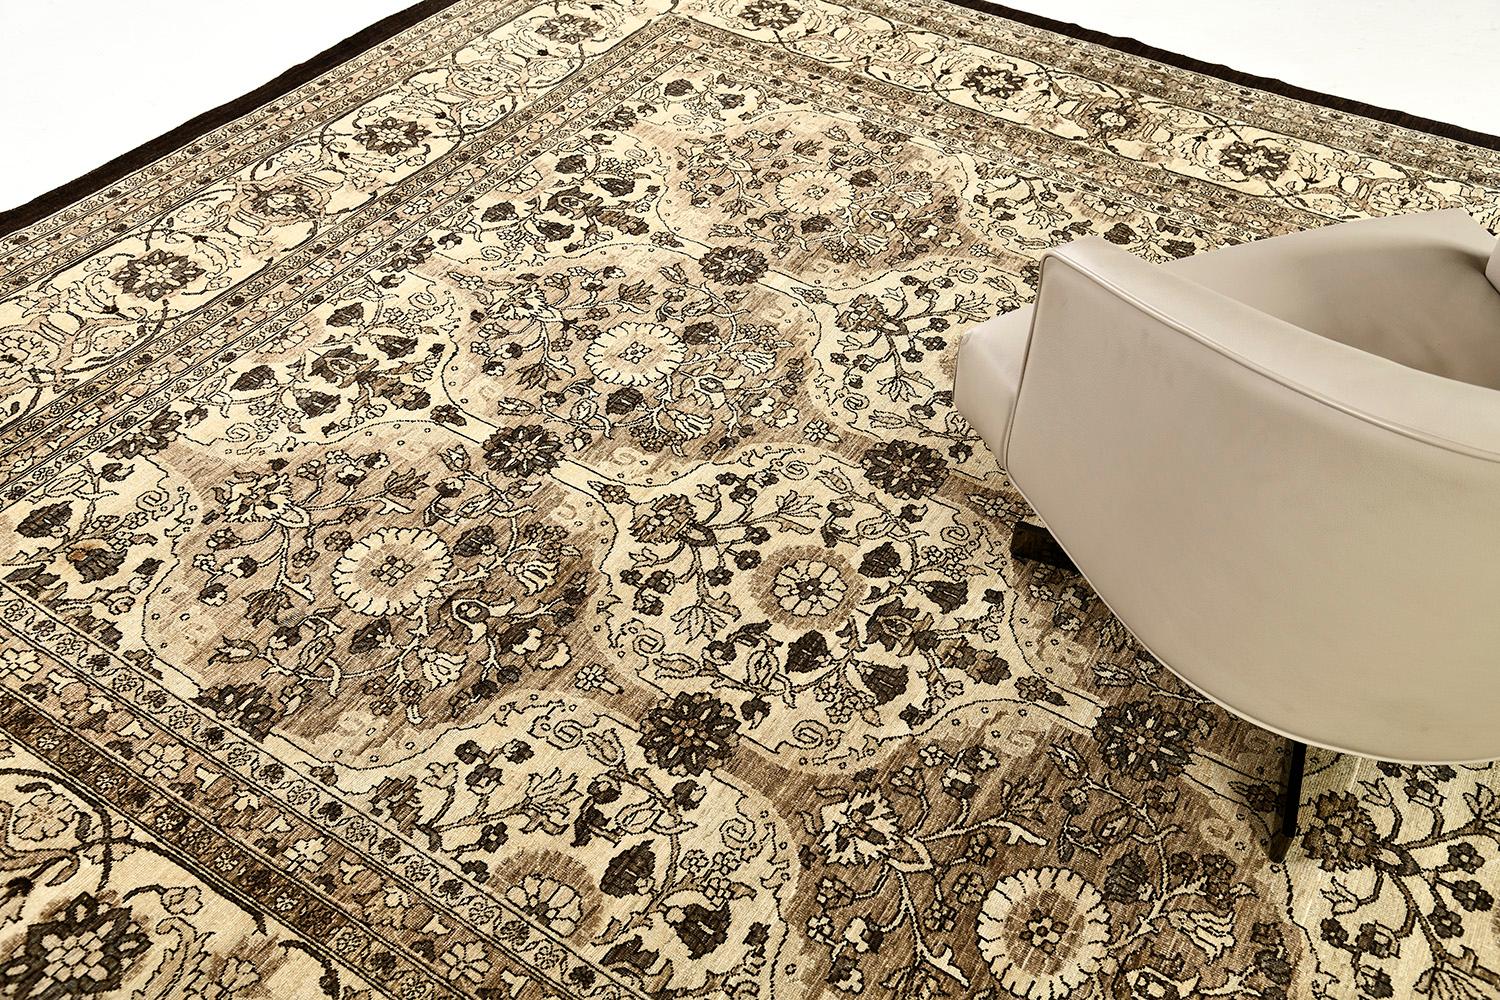 An exquisite Vintage Style Tabriz Revival rug that exudes its classic character through its majestic design and muted warm colour scheme. Featuring the alternating floral motifs that leads to bring a classy, warm and cozy vibe. This rug will